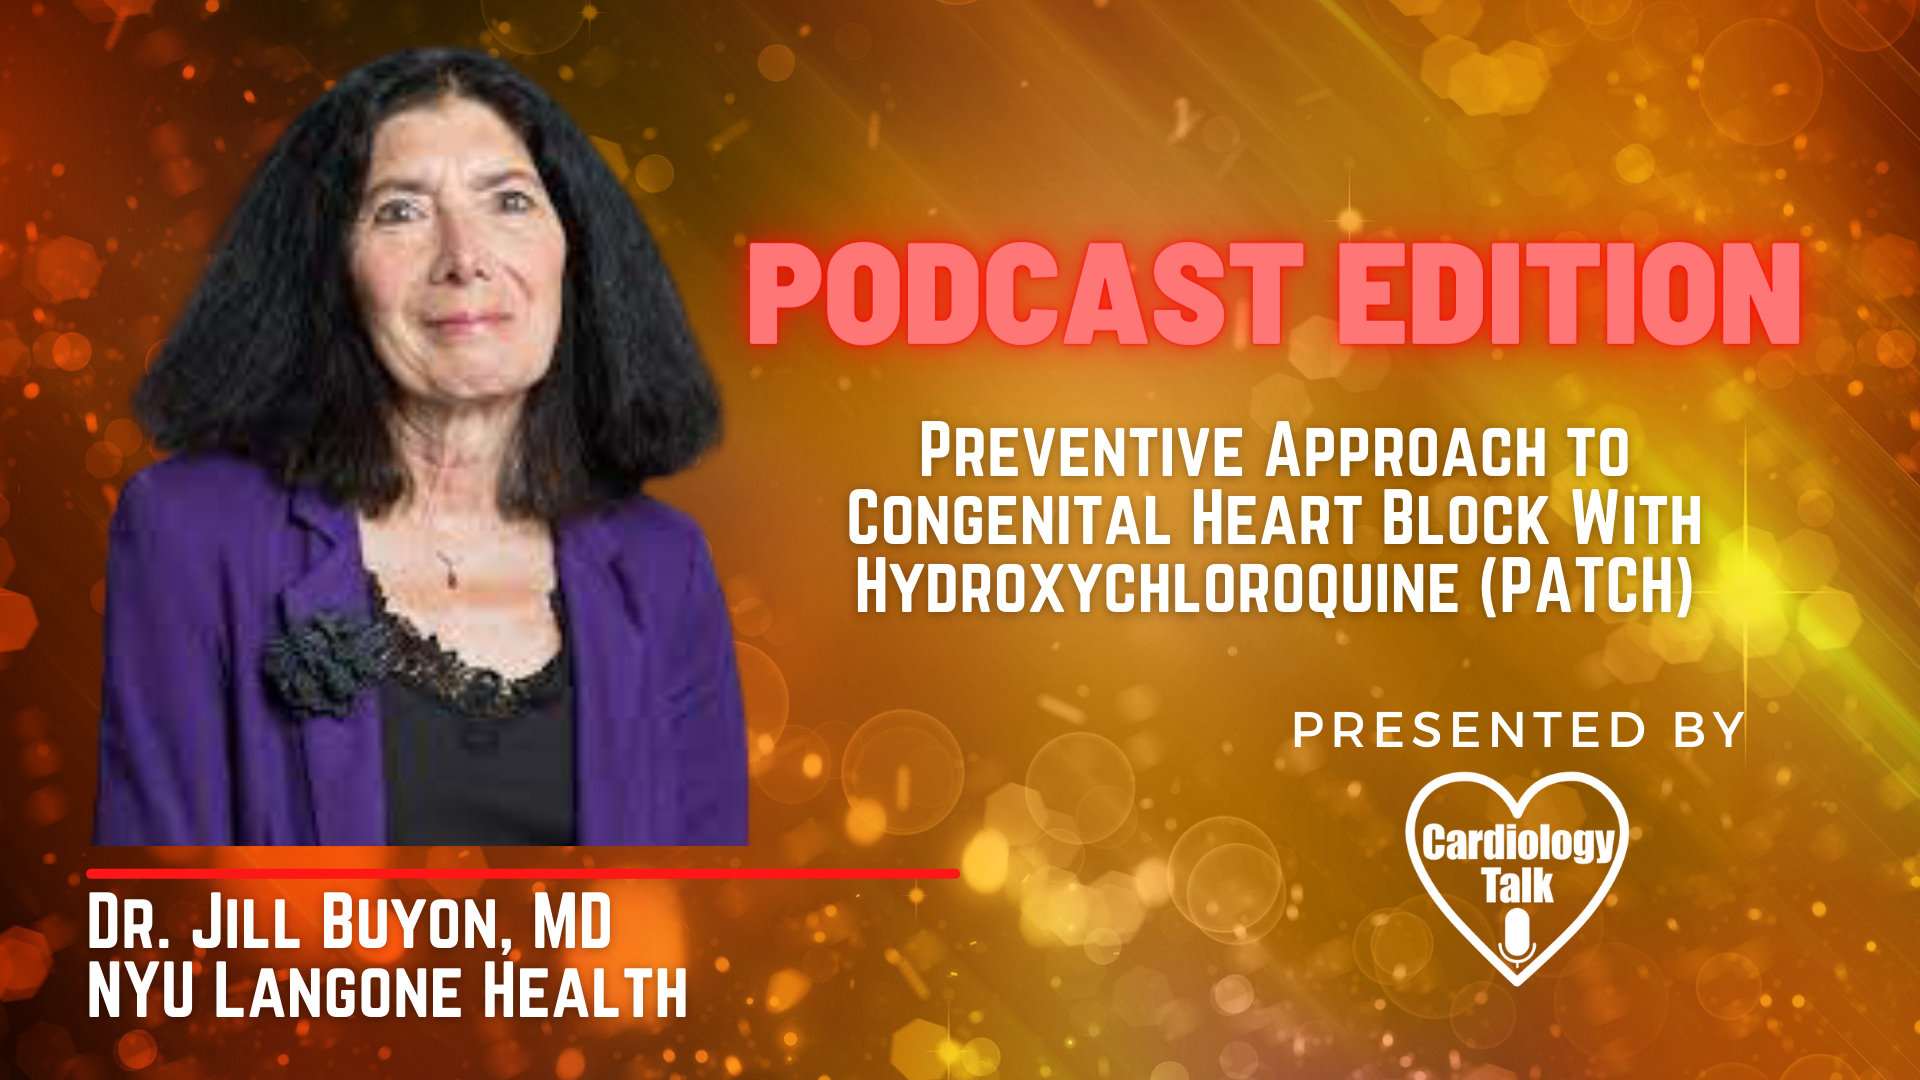 Podcast- Preventive Approach to Congenital Heart Block With Hydroxychloroquine (PATCH) @JillBuyonMD @NYULangone #HeartBlock #PATCH #Cardiology